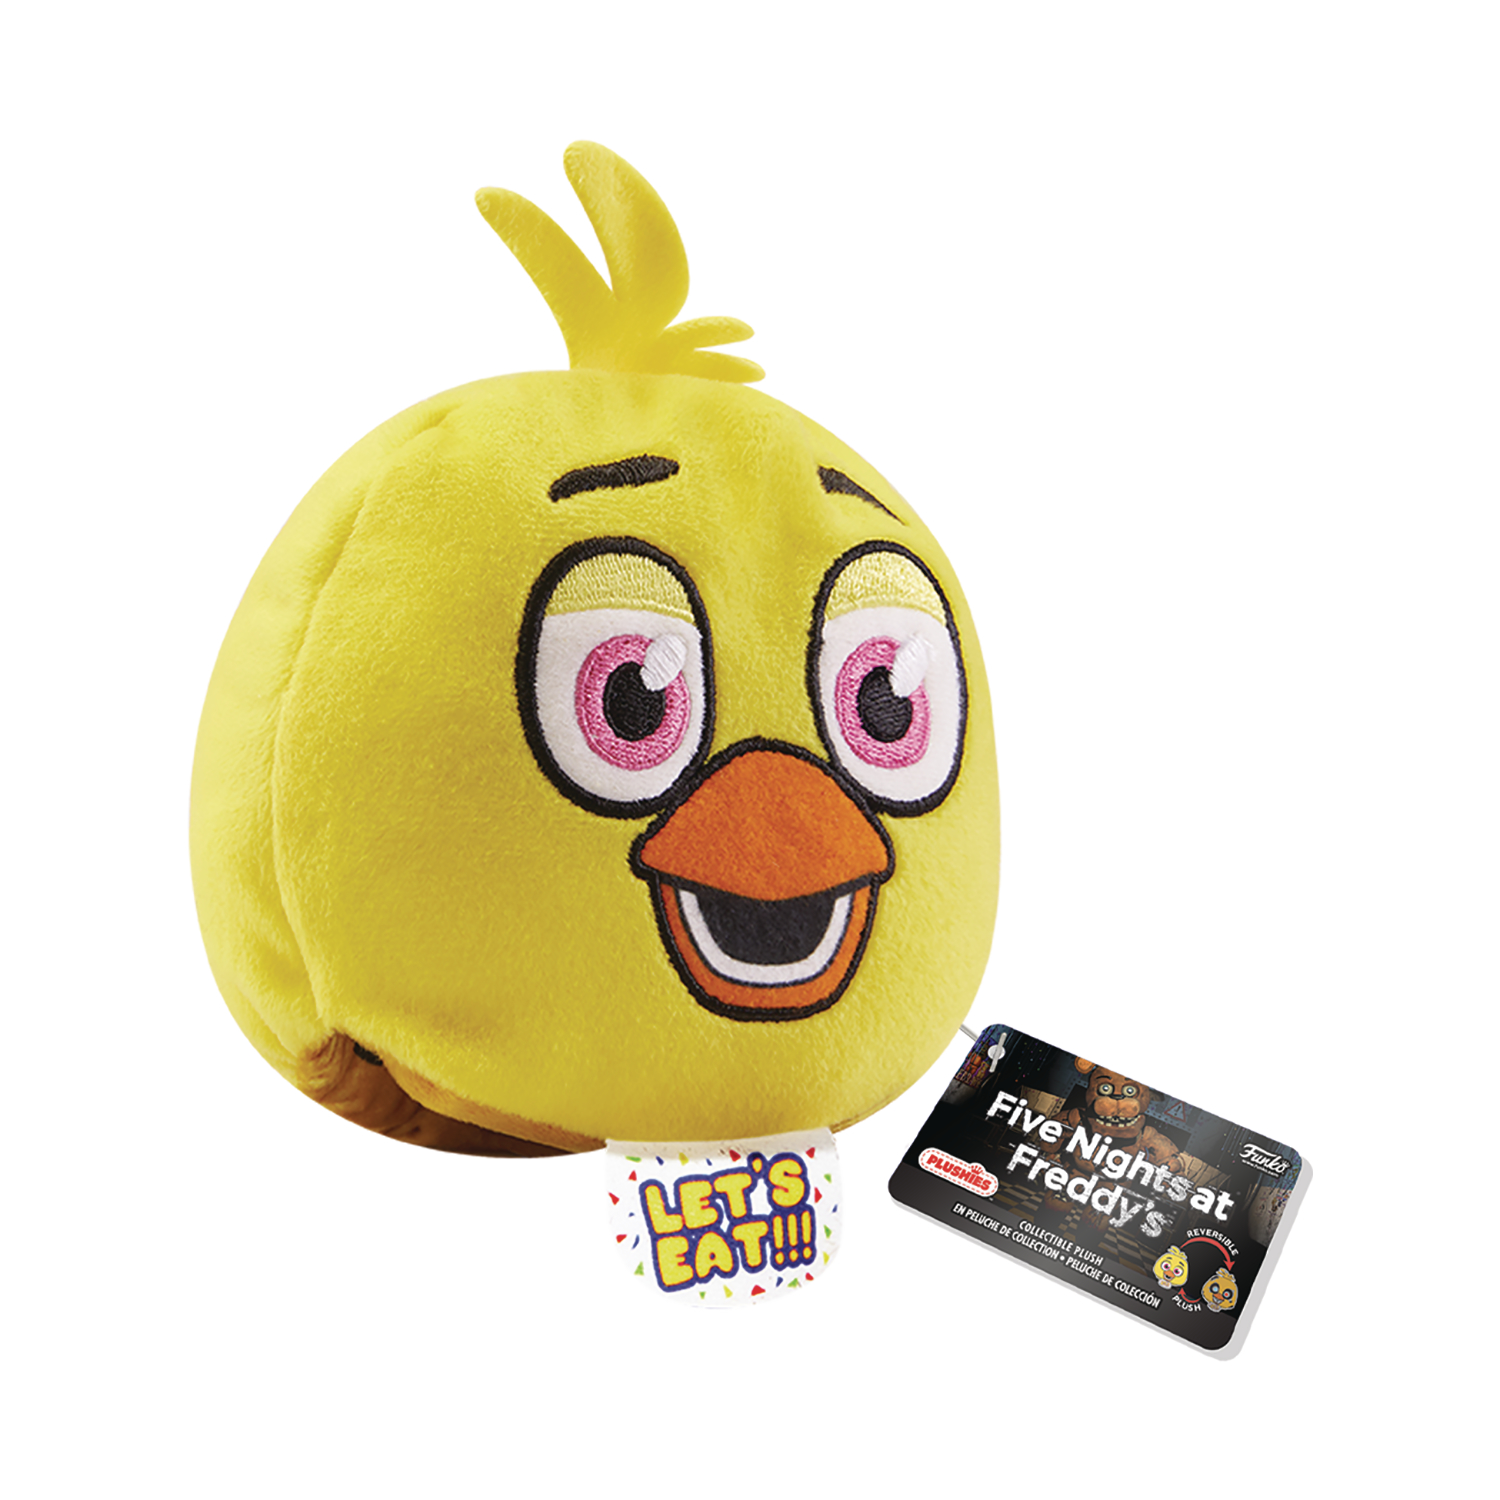 Funko Five Nights At Freddys Revers Heads Chica 4 Inch Plush